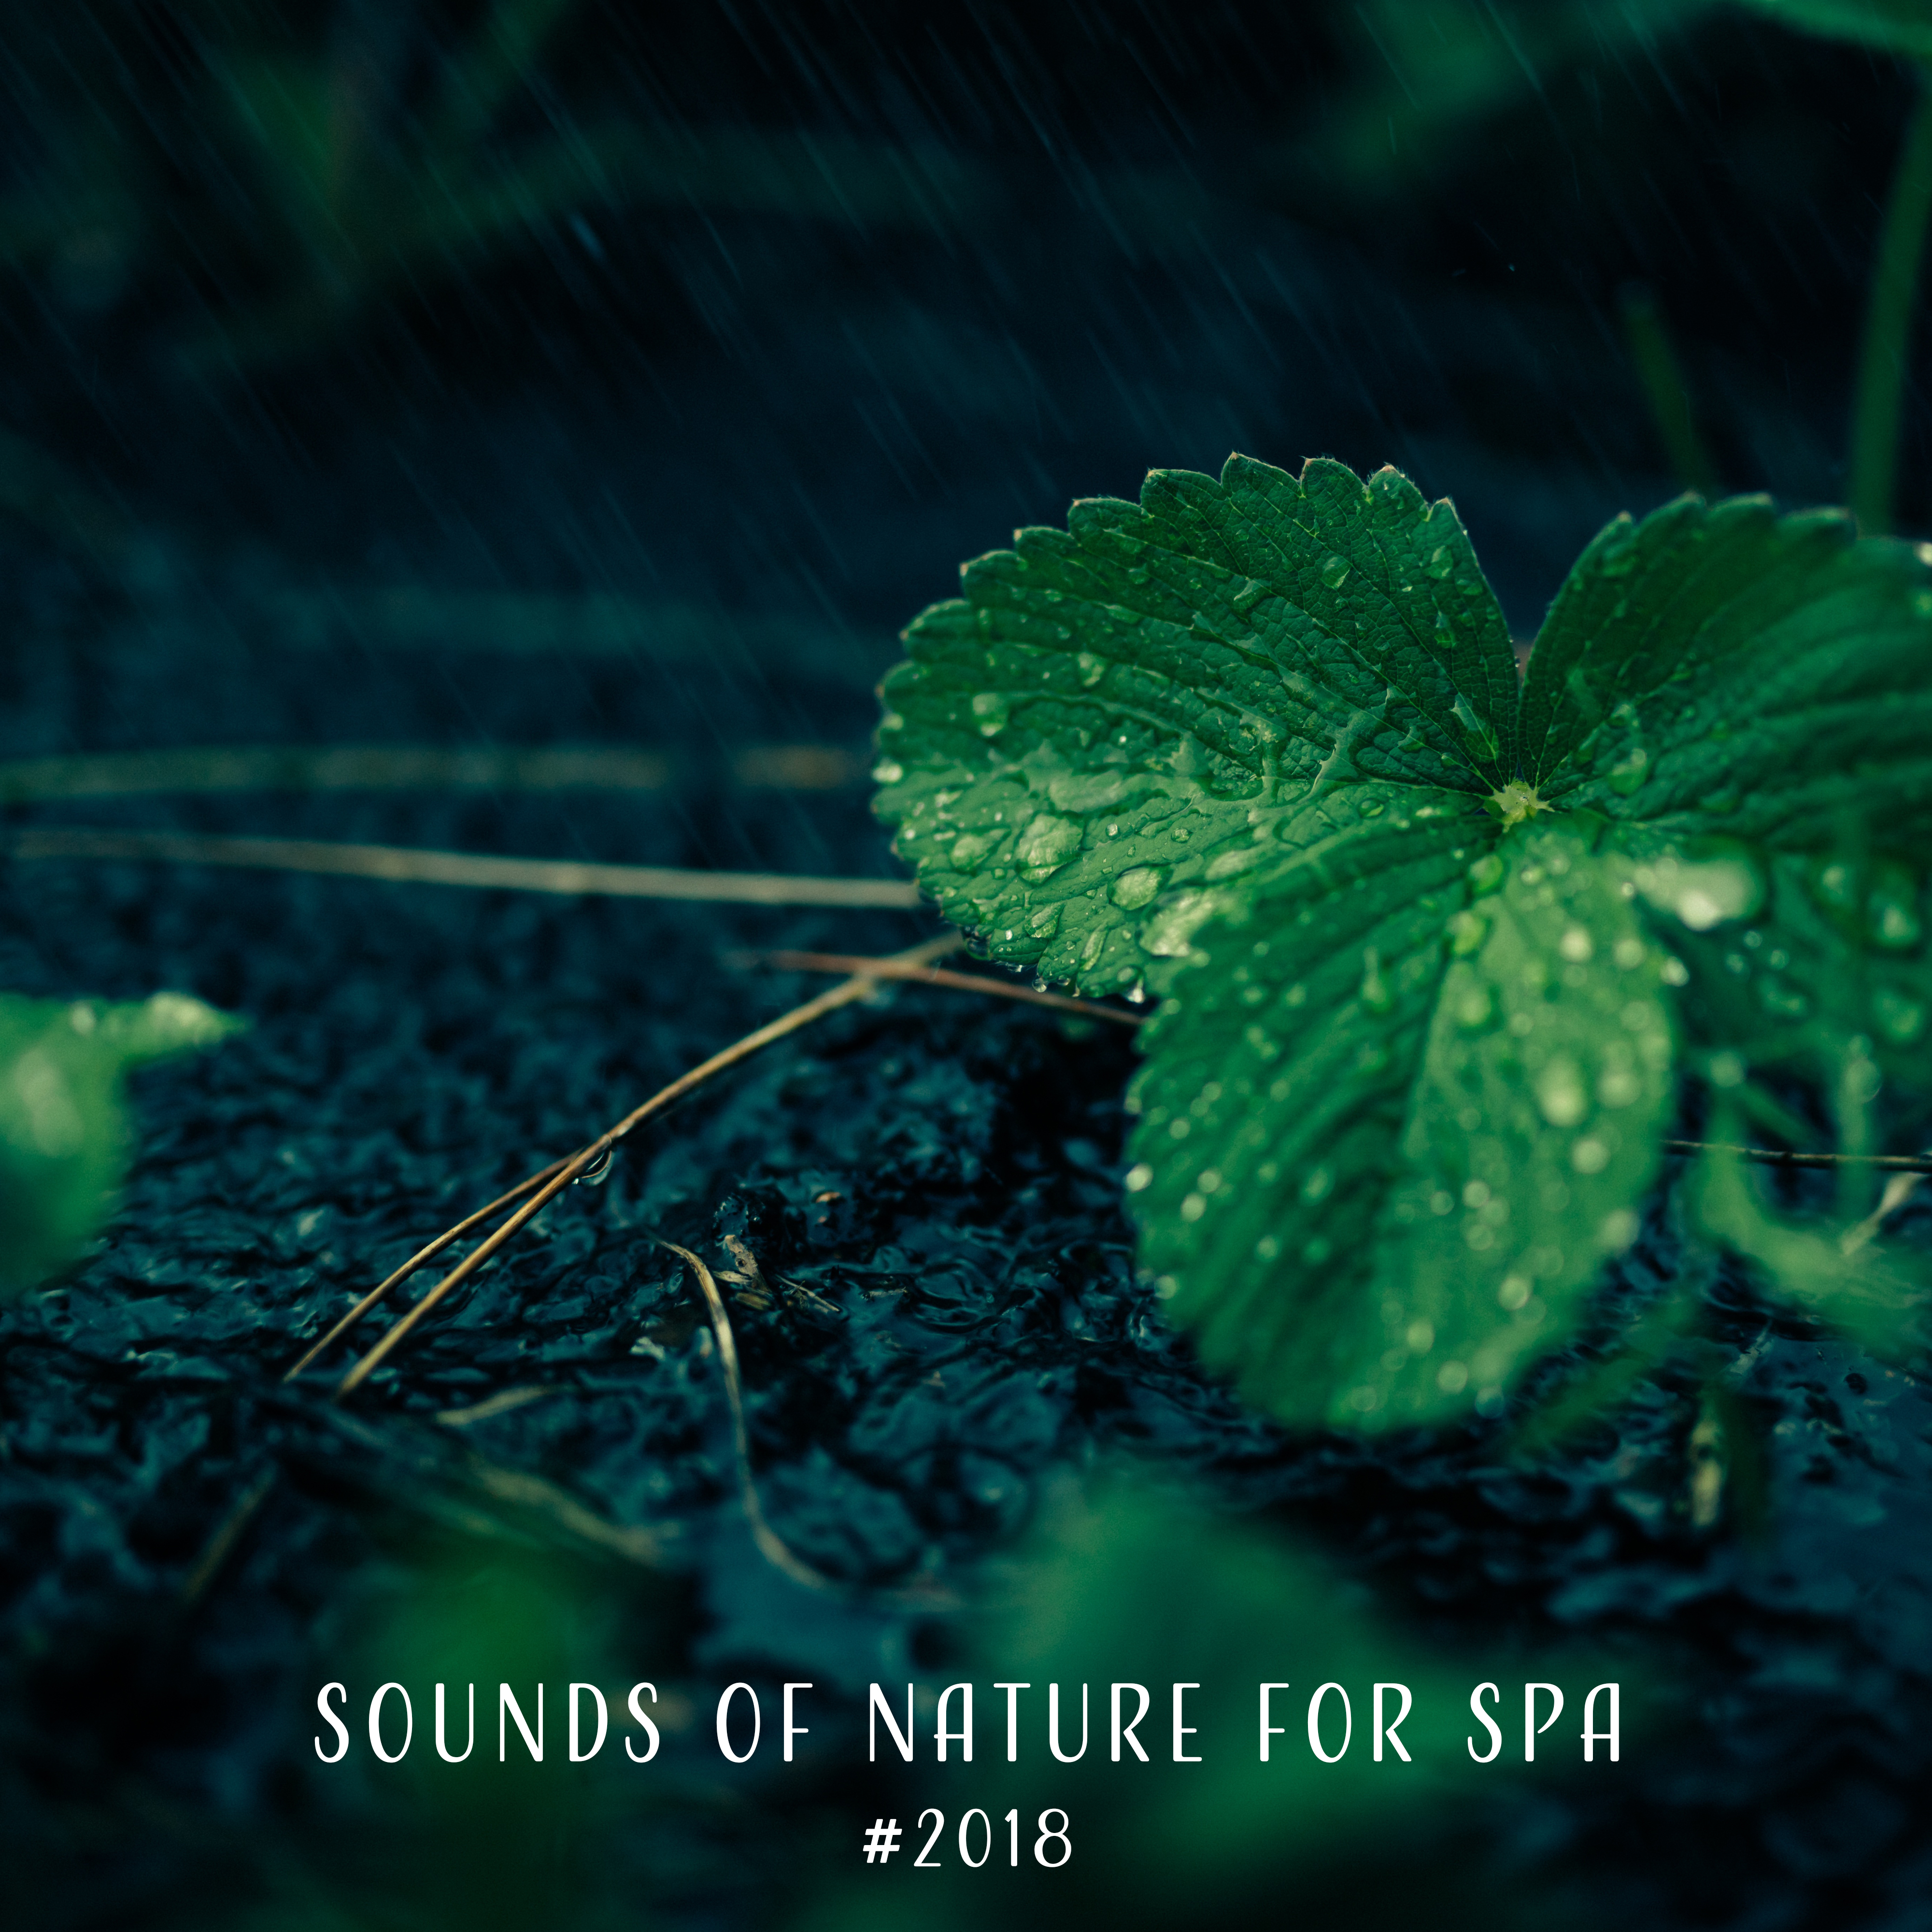 # 2018 Sounds of Nature for Spa